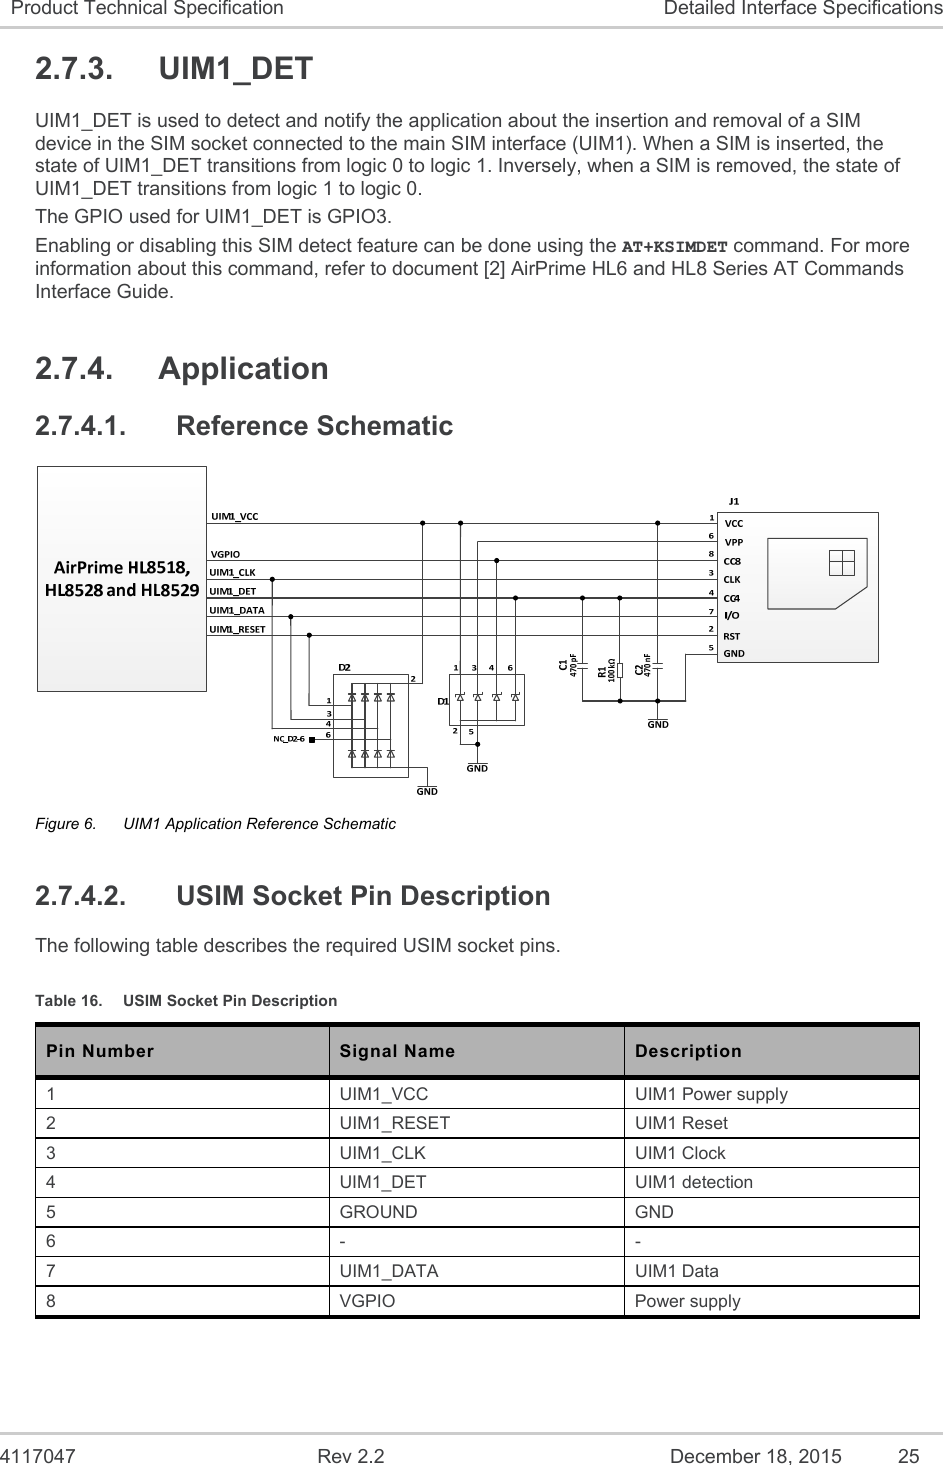  4117047  Rev 2.2  December 18, 2015  25 Product Technical Specification  Detailed Interface Specifications 2.7.3.  UIM1_DET UIM1_DET is used to detect and notify the application about the insertion and removal of a SIM device in the SIM socket connected to the main SIM interface (UIM1). When a SIM is inserted, the state of UIM1_DET transitions from logic 0 to logic 1. Inversely, when a SIM is removed, the state of UIM1_DET transitions from logic 1 to logic 0. The GPIO used for UIM1_DET is GPIO3. Enabling or disabling this SIM detect feature can be done using the AT+KSIMDET command. For more information about this command, refer to document [2] AirPrime HL6 and HL8 Series AT Commands Interface Guide. 2.7.4.  Application 2.7.4.1.  Reference Schematic  Figure 6.  UIM1 Application Reference Schematic 2.7.4.2.  USIM Socket Pin Description The following table describes the required USIM socket pins. Table 16.  USIM Socket Pin Description Pin Number  Signal Name  Description 1  UIM1_VCC  UIM1 Power supply 2  UIM1_RESET  UIM1 Reset 3  UIM1_CLK  UIM1 Clock 4  UIM1_DET  UIM1 detection 5  GROUND  GND 6  -  - 7  UIM1_DATA  UIM1 Data 8  VGPIO  Power supply 